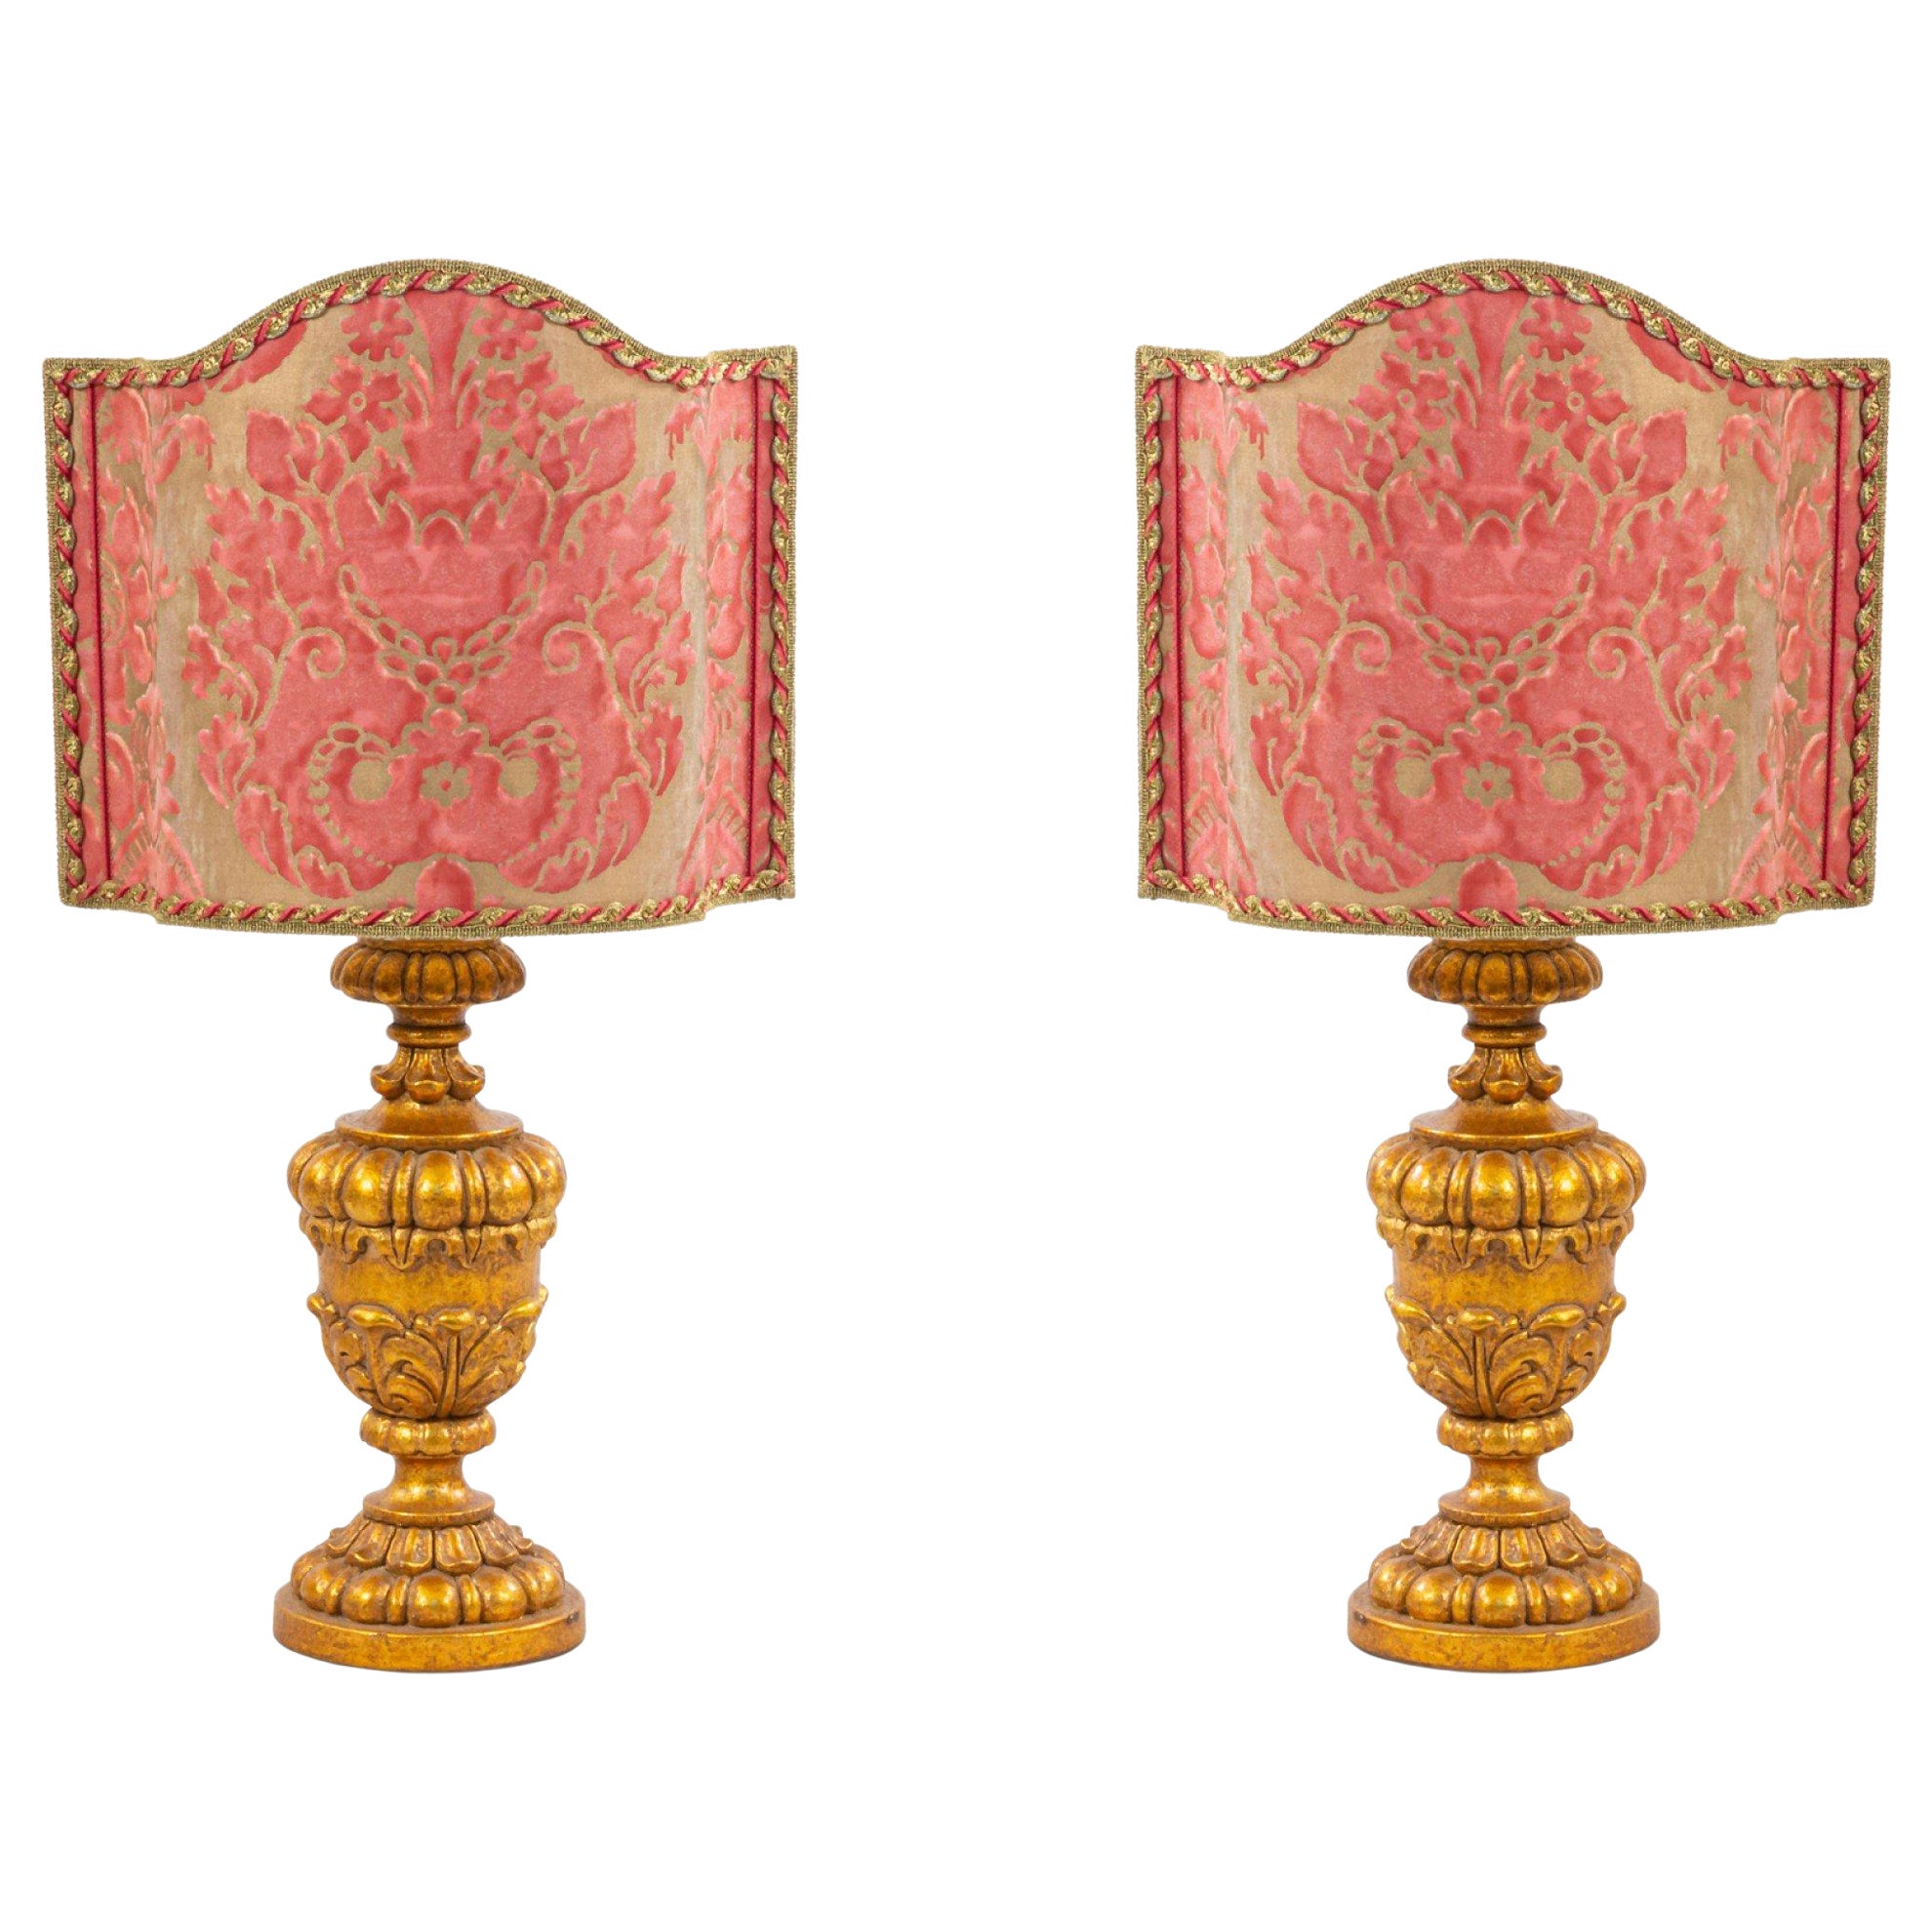 Pair of Italian Rococo Style Gilt Table Lamps